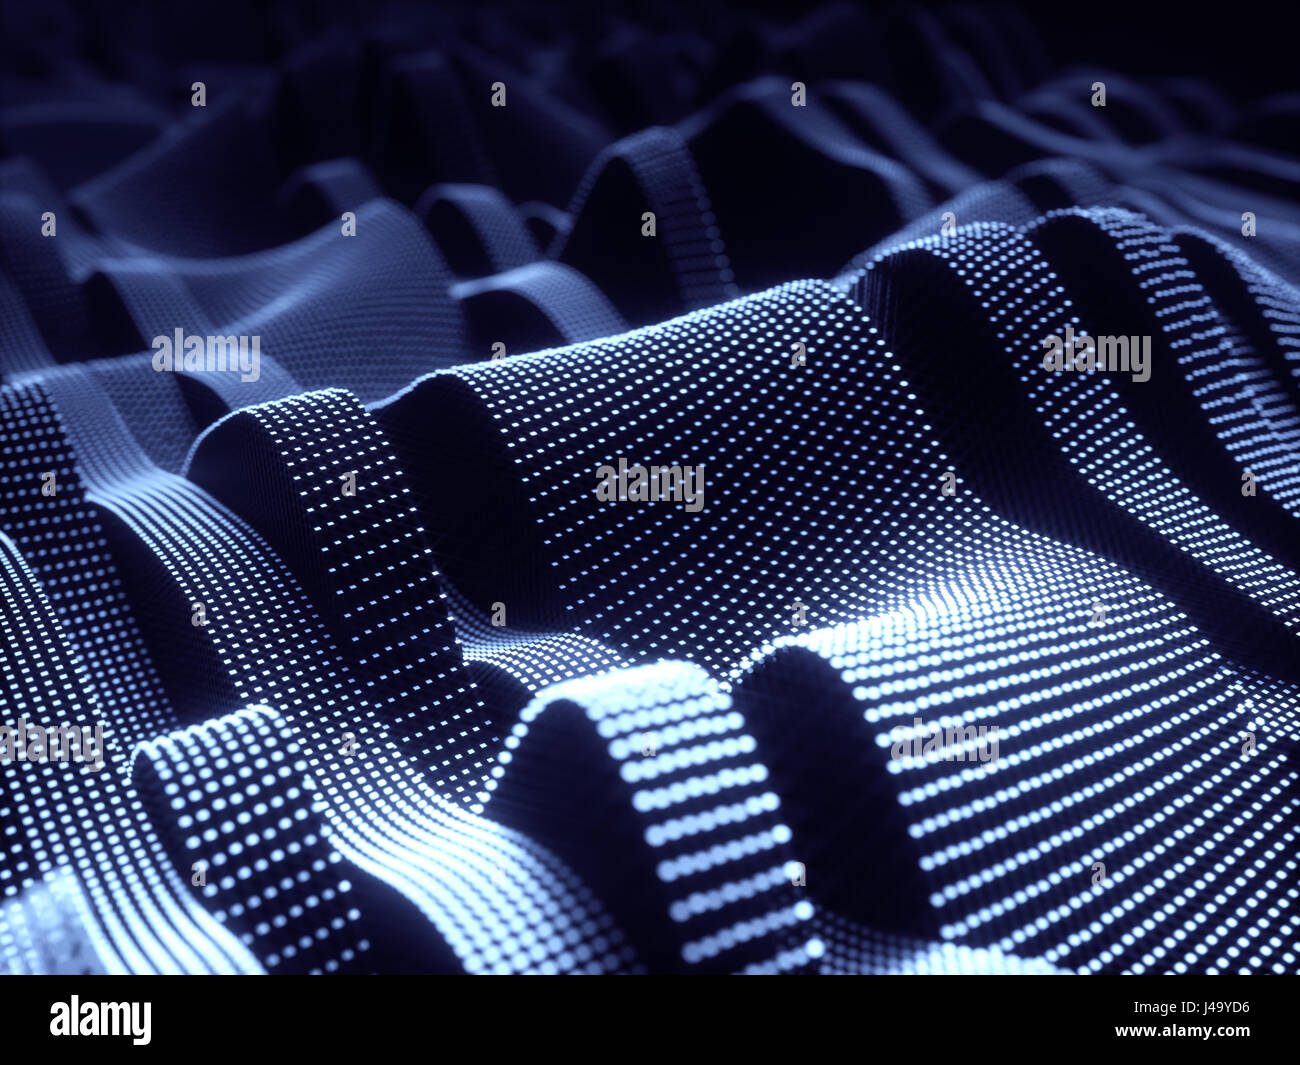 3D illustration. Abstract background of metallic structure. Stock Photo